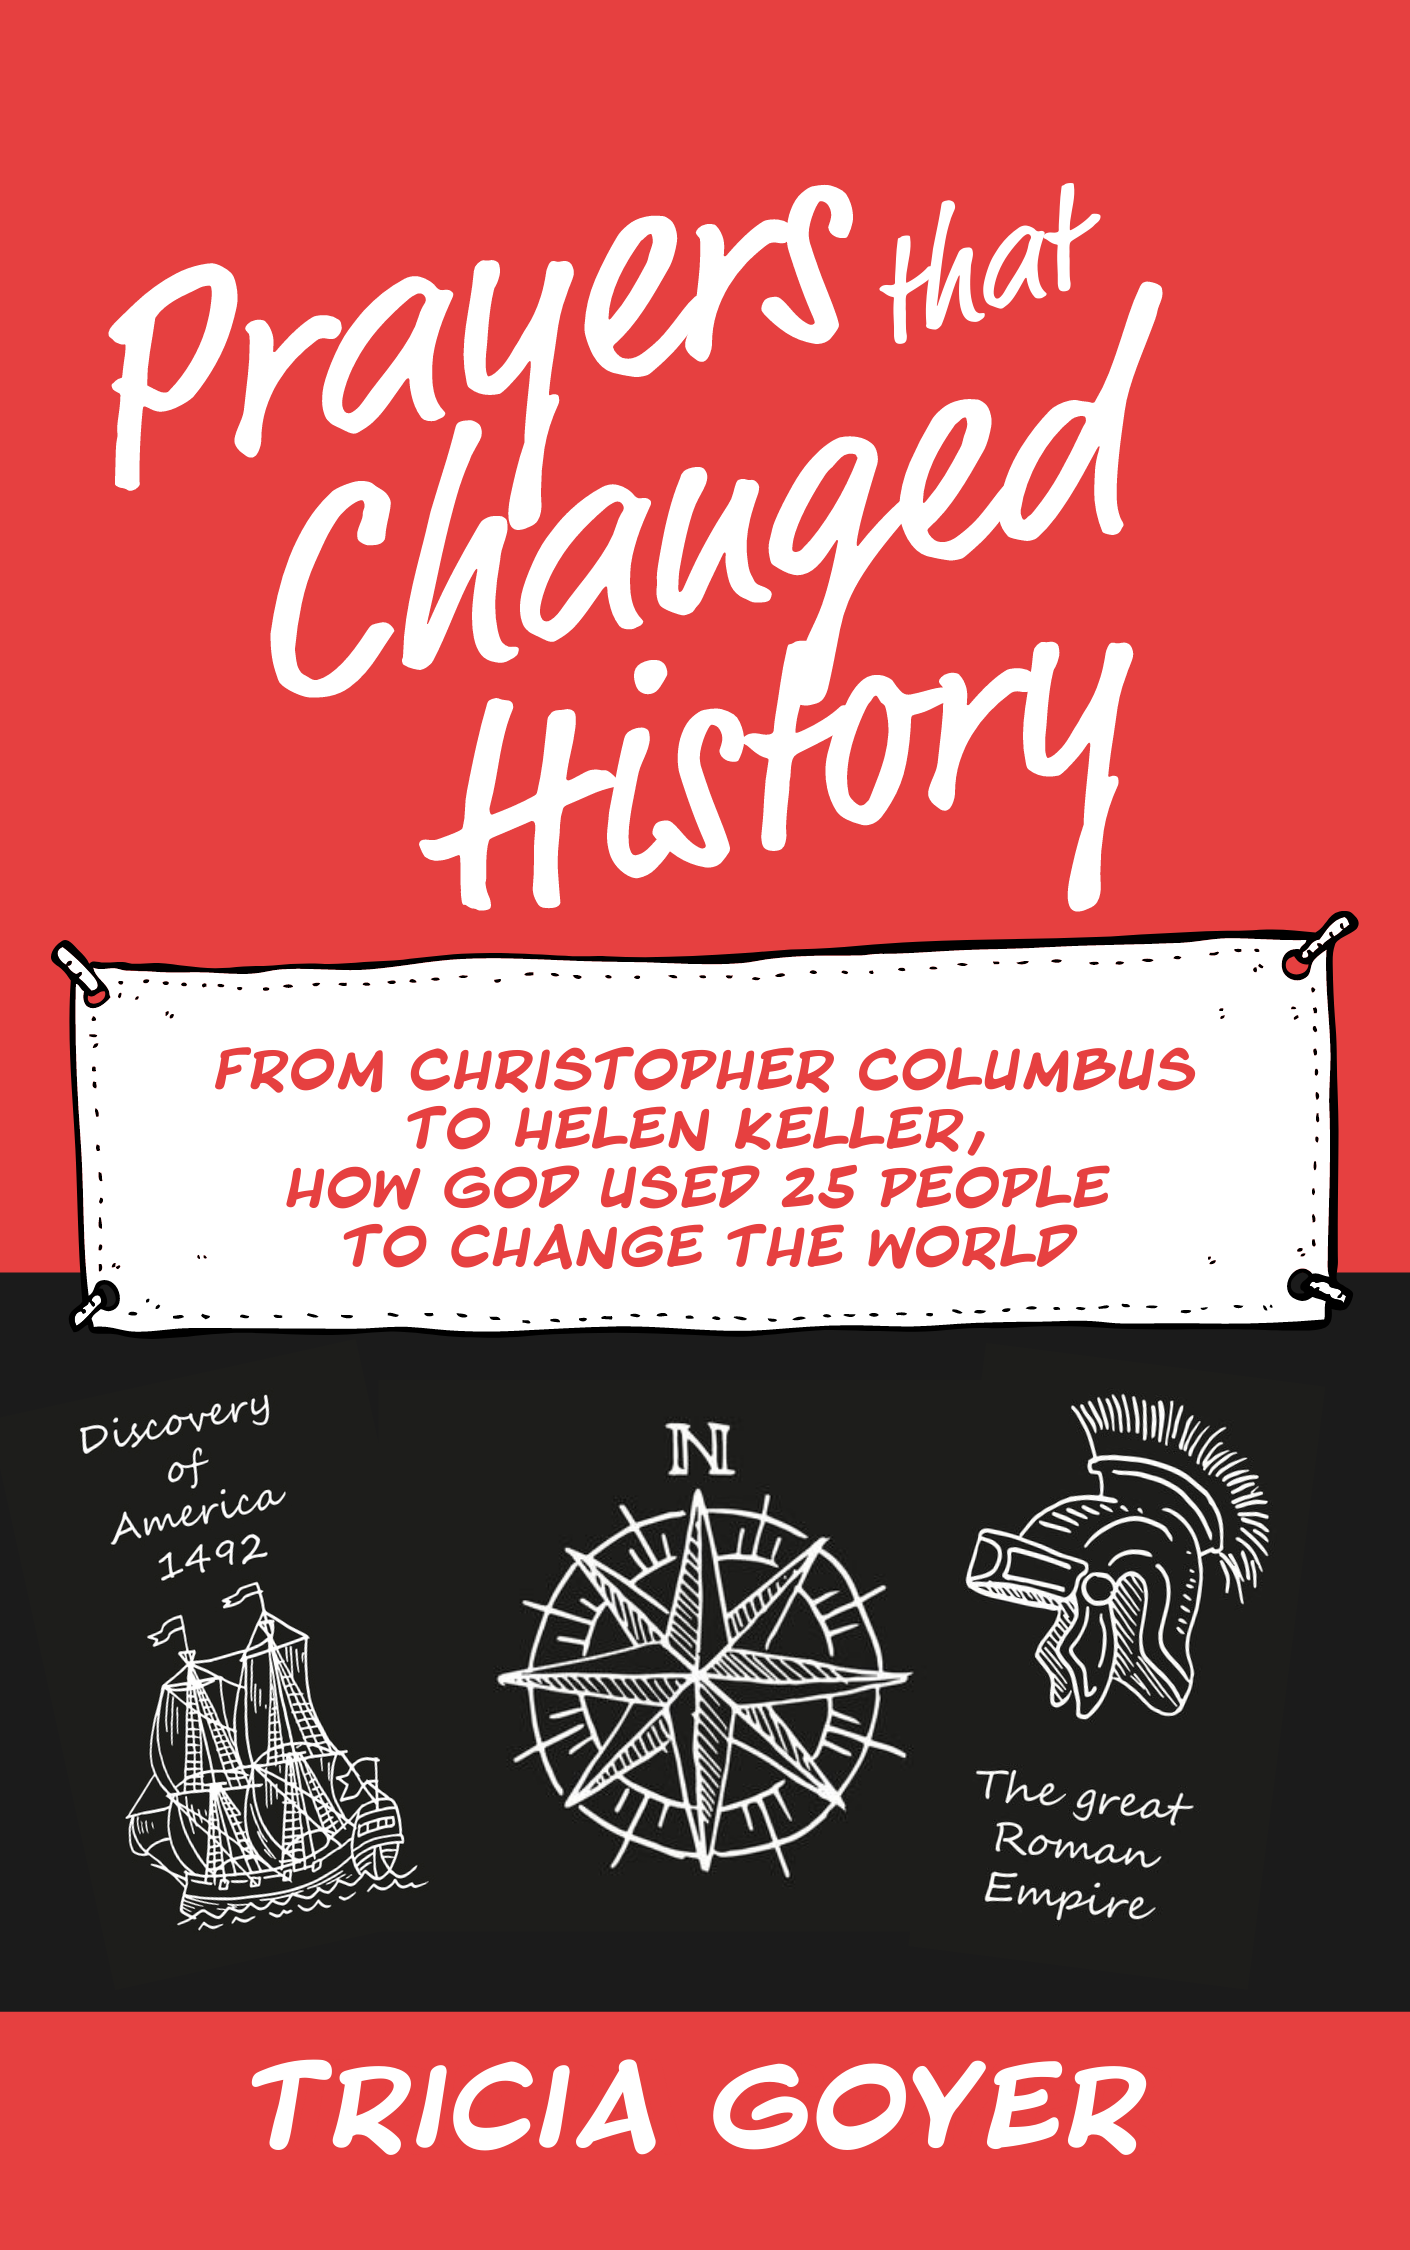 Prayers that Changed History by Tricia Goyer